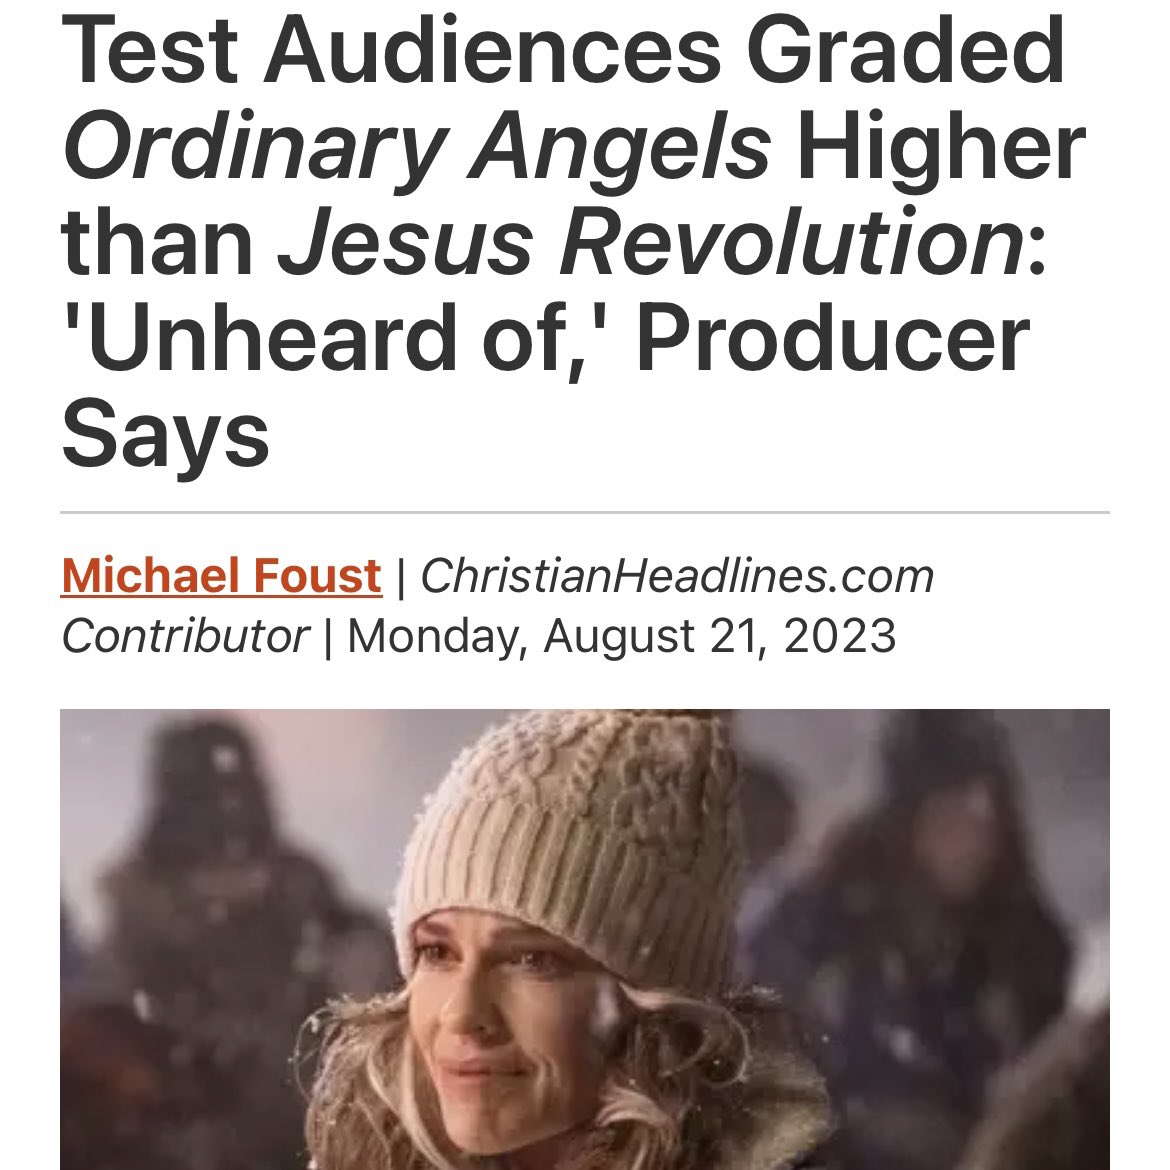 'It's a miracle story,' producer Andy Erwin told Christian Headlines. The film, he said, 'shows the gospel in action.' christianheadlines.com/contributors/m… We couldn’t agree more! #OrdinaryAngelsMovie #BeTheLight